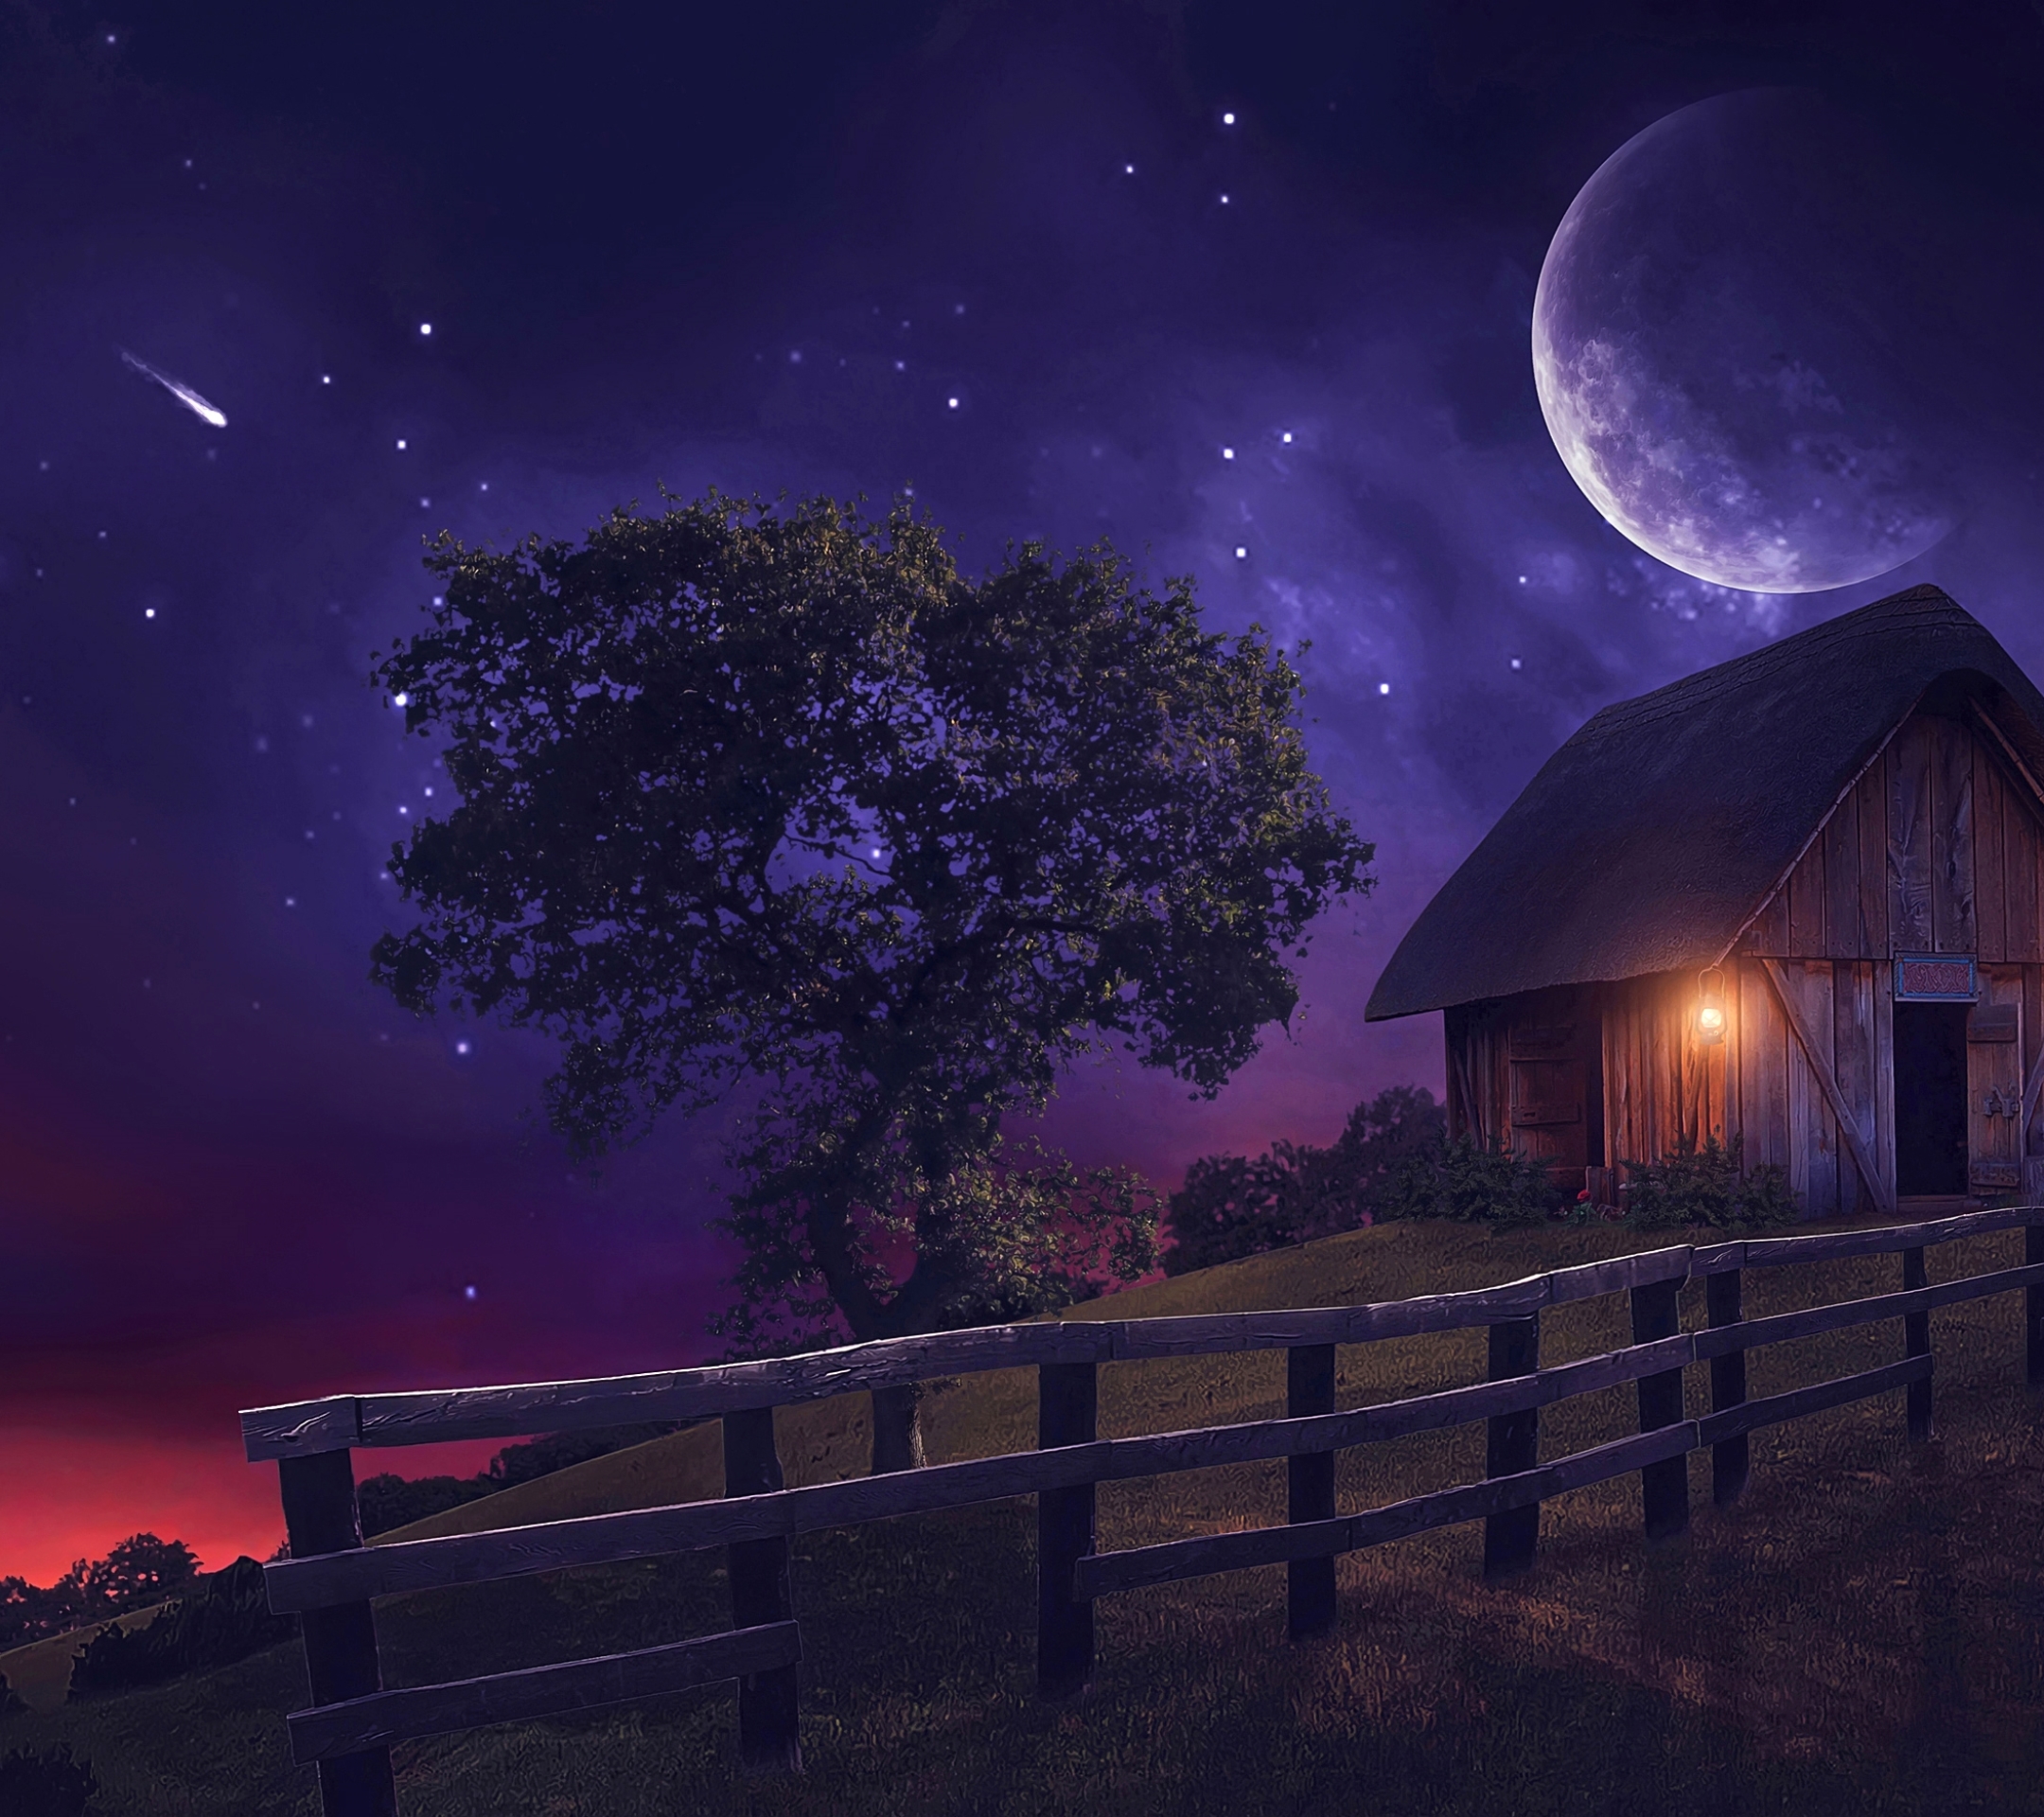 moon, artistic, fantasy, fence, tree, shed, stars